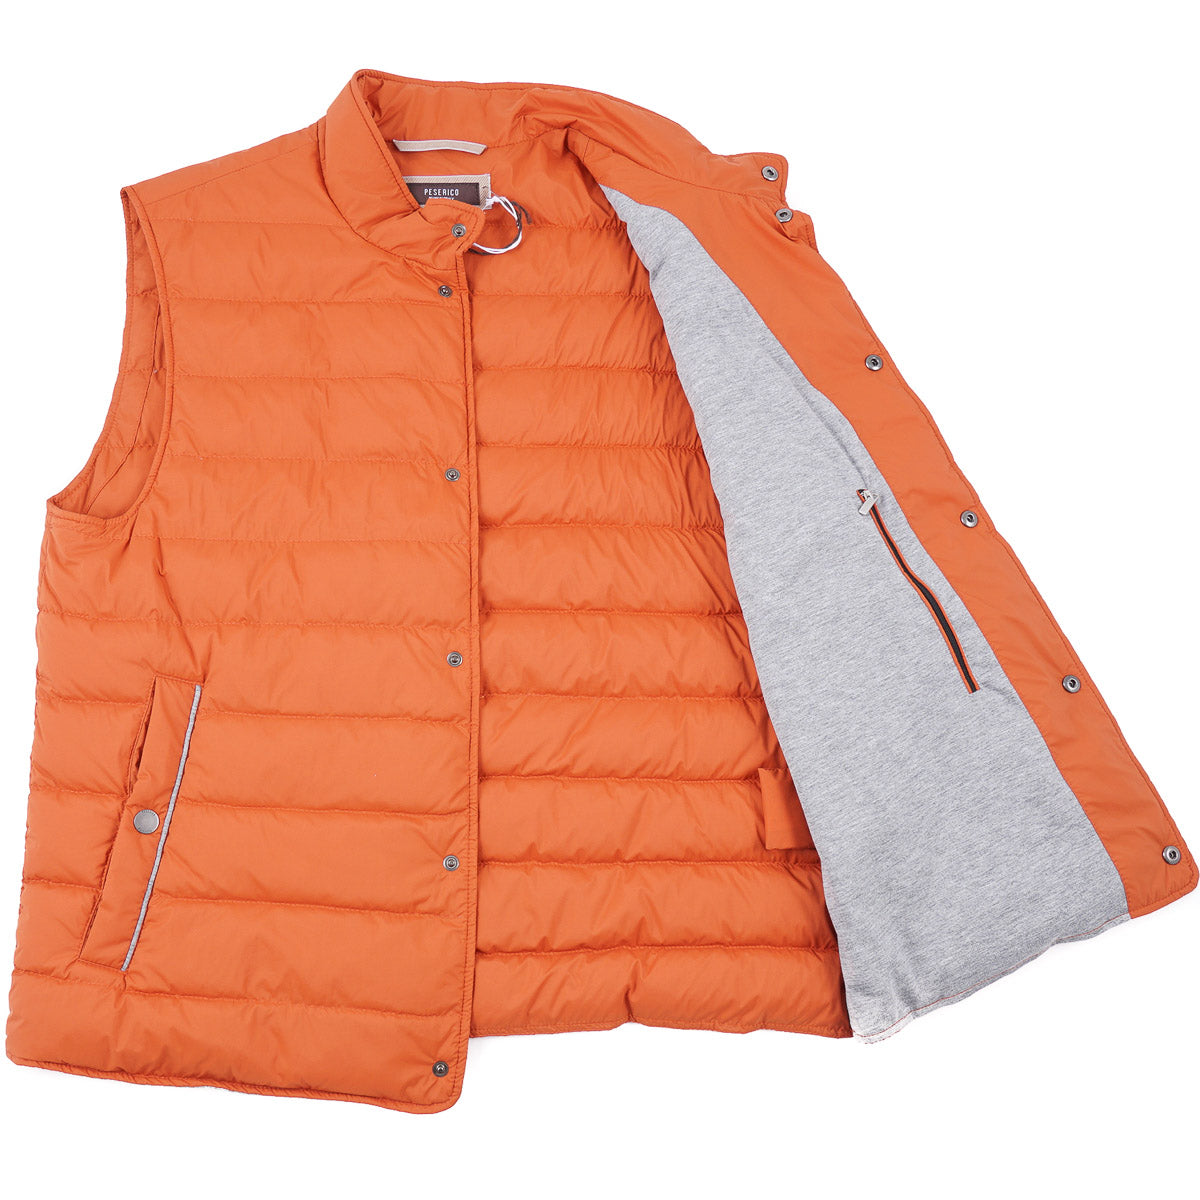 Peserico Lightweight Quilted Down Vest - Top Shelf Apparel